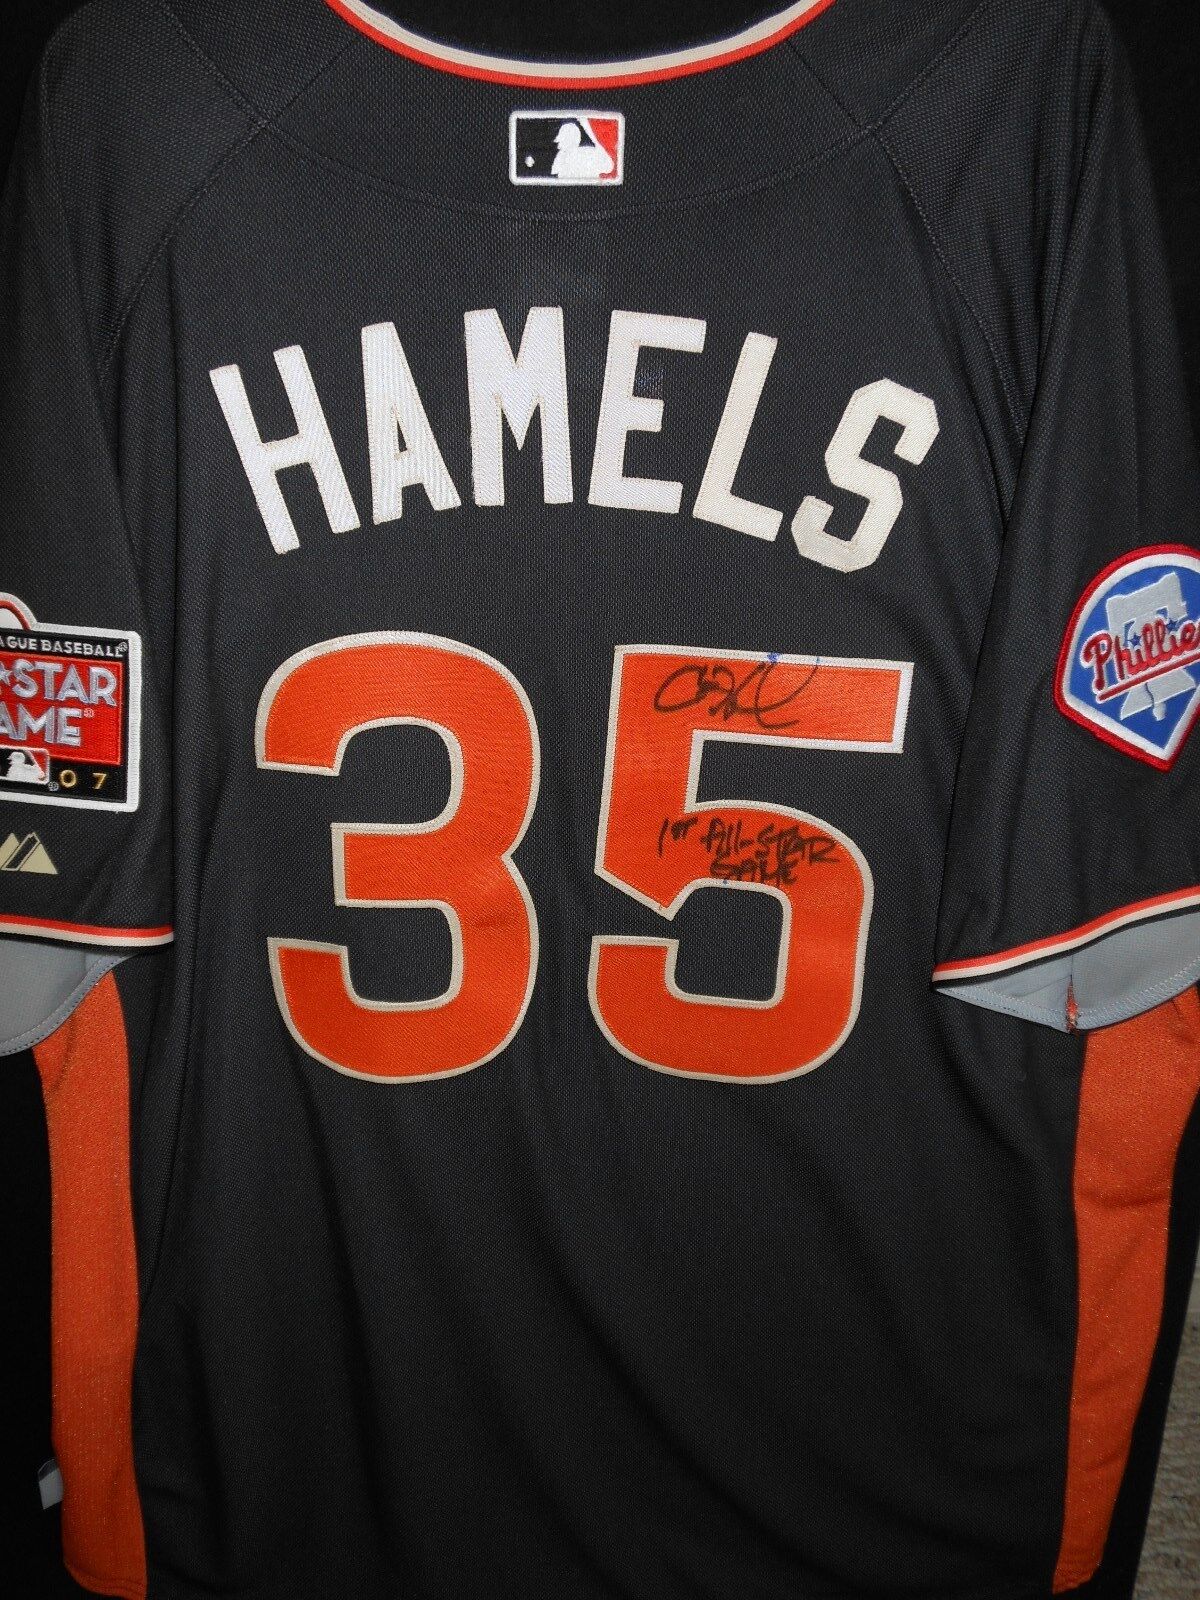 COLE HAMELS SIGNED 2007 ALL STAR JERSEY + BALL - MAJESTIC- PHILADELPHIA PHILLIES